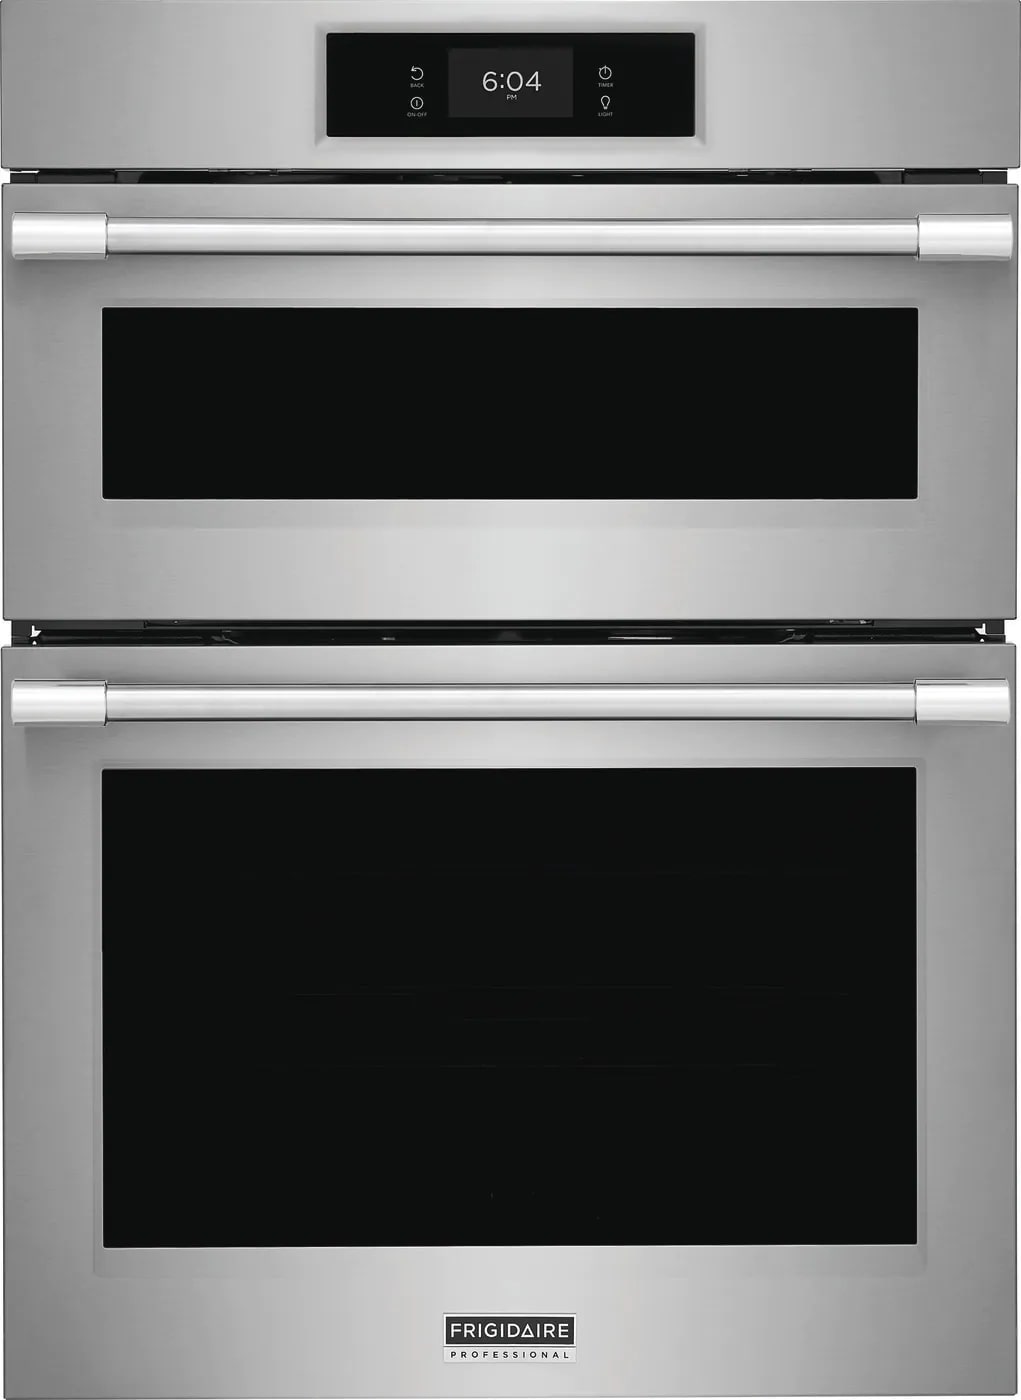 Frigidaire Professional - 5.3 cu. ft Combination Wall Oven in Stainless - PCWM3080AF